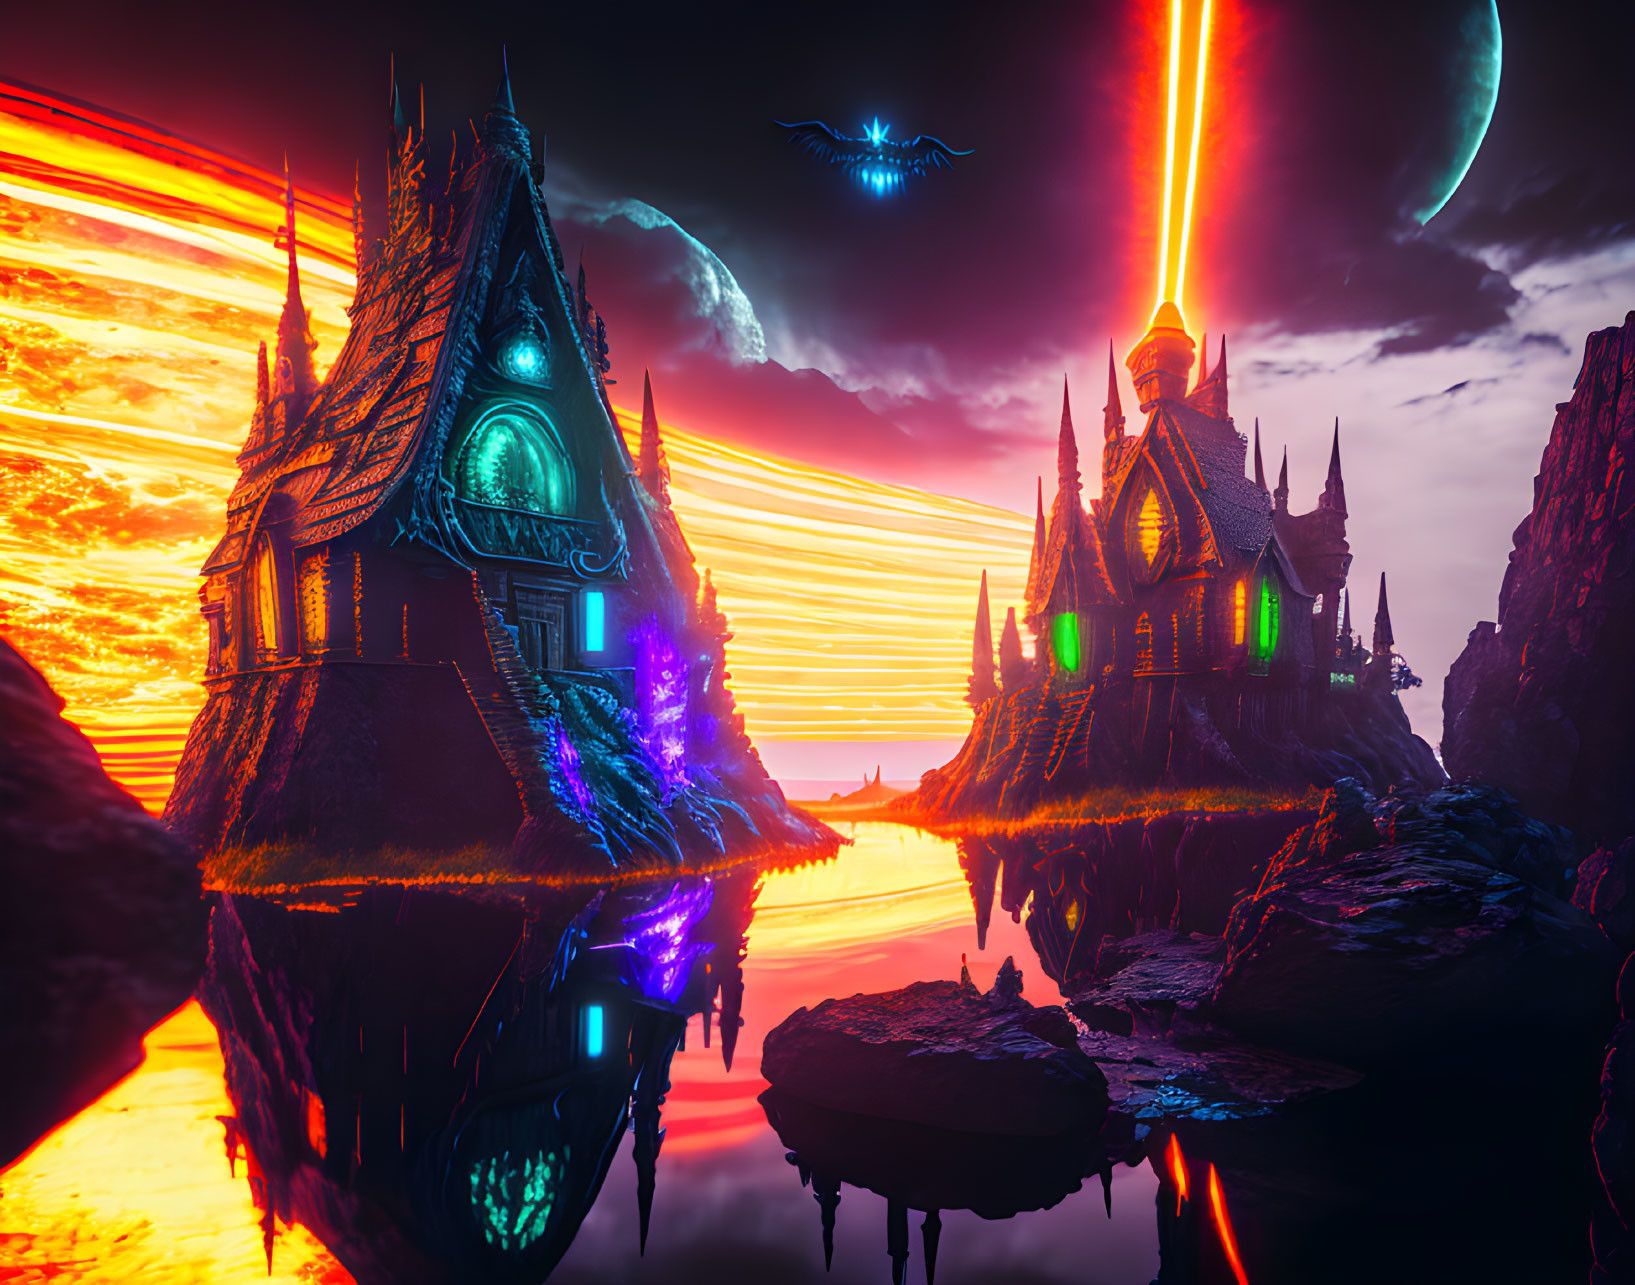 Fantasy landscape with neon structures, moonlit sky, and flying creature